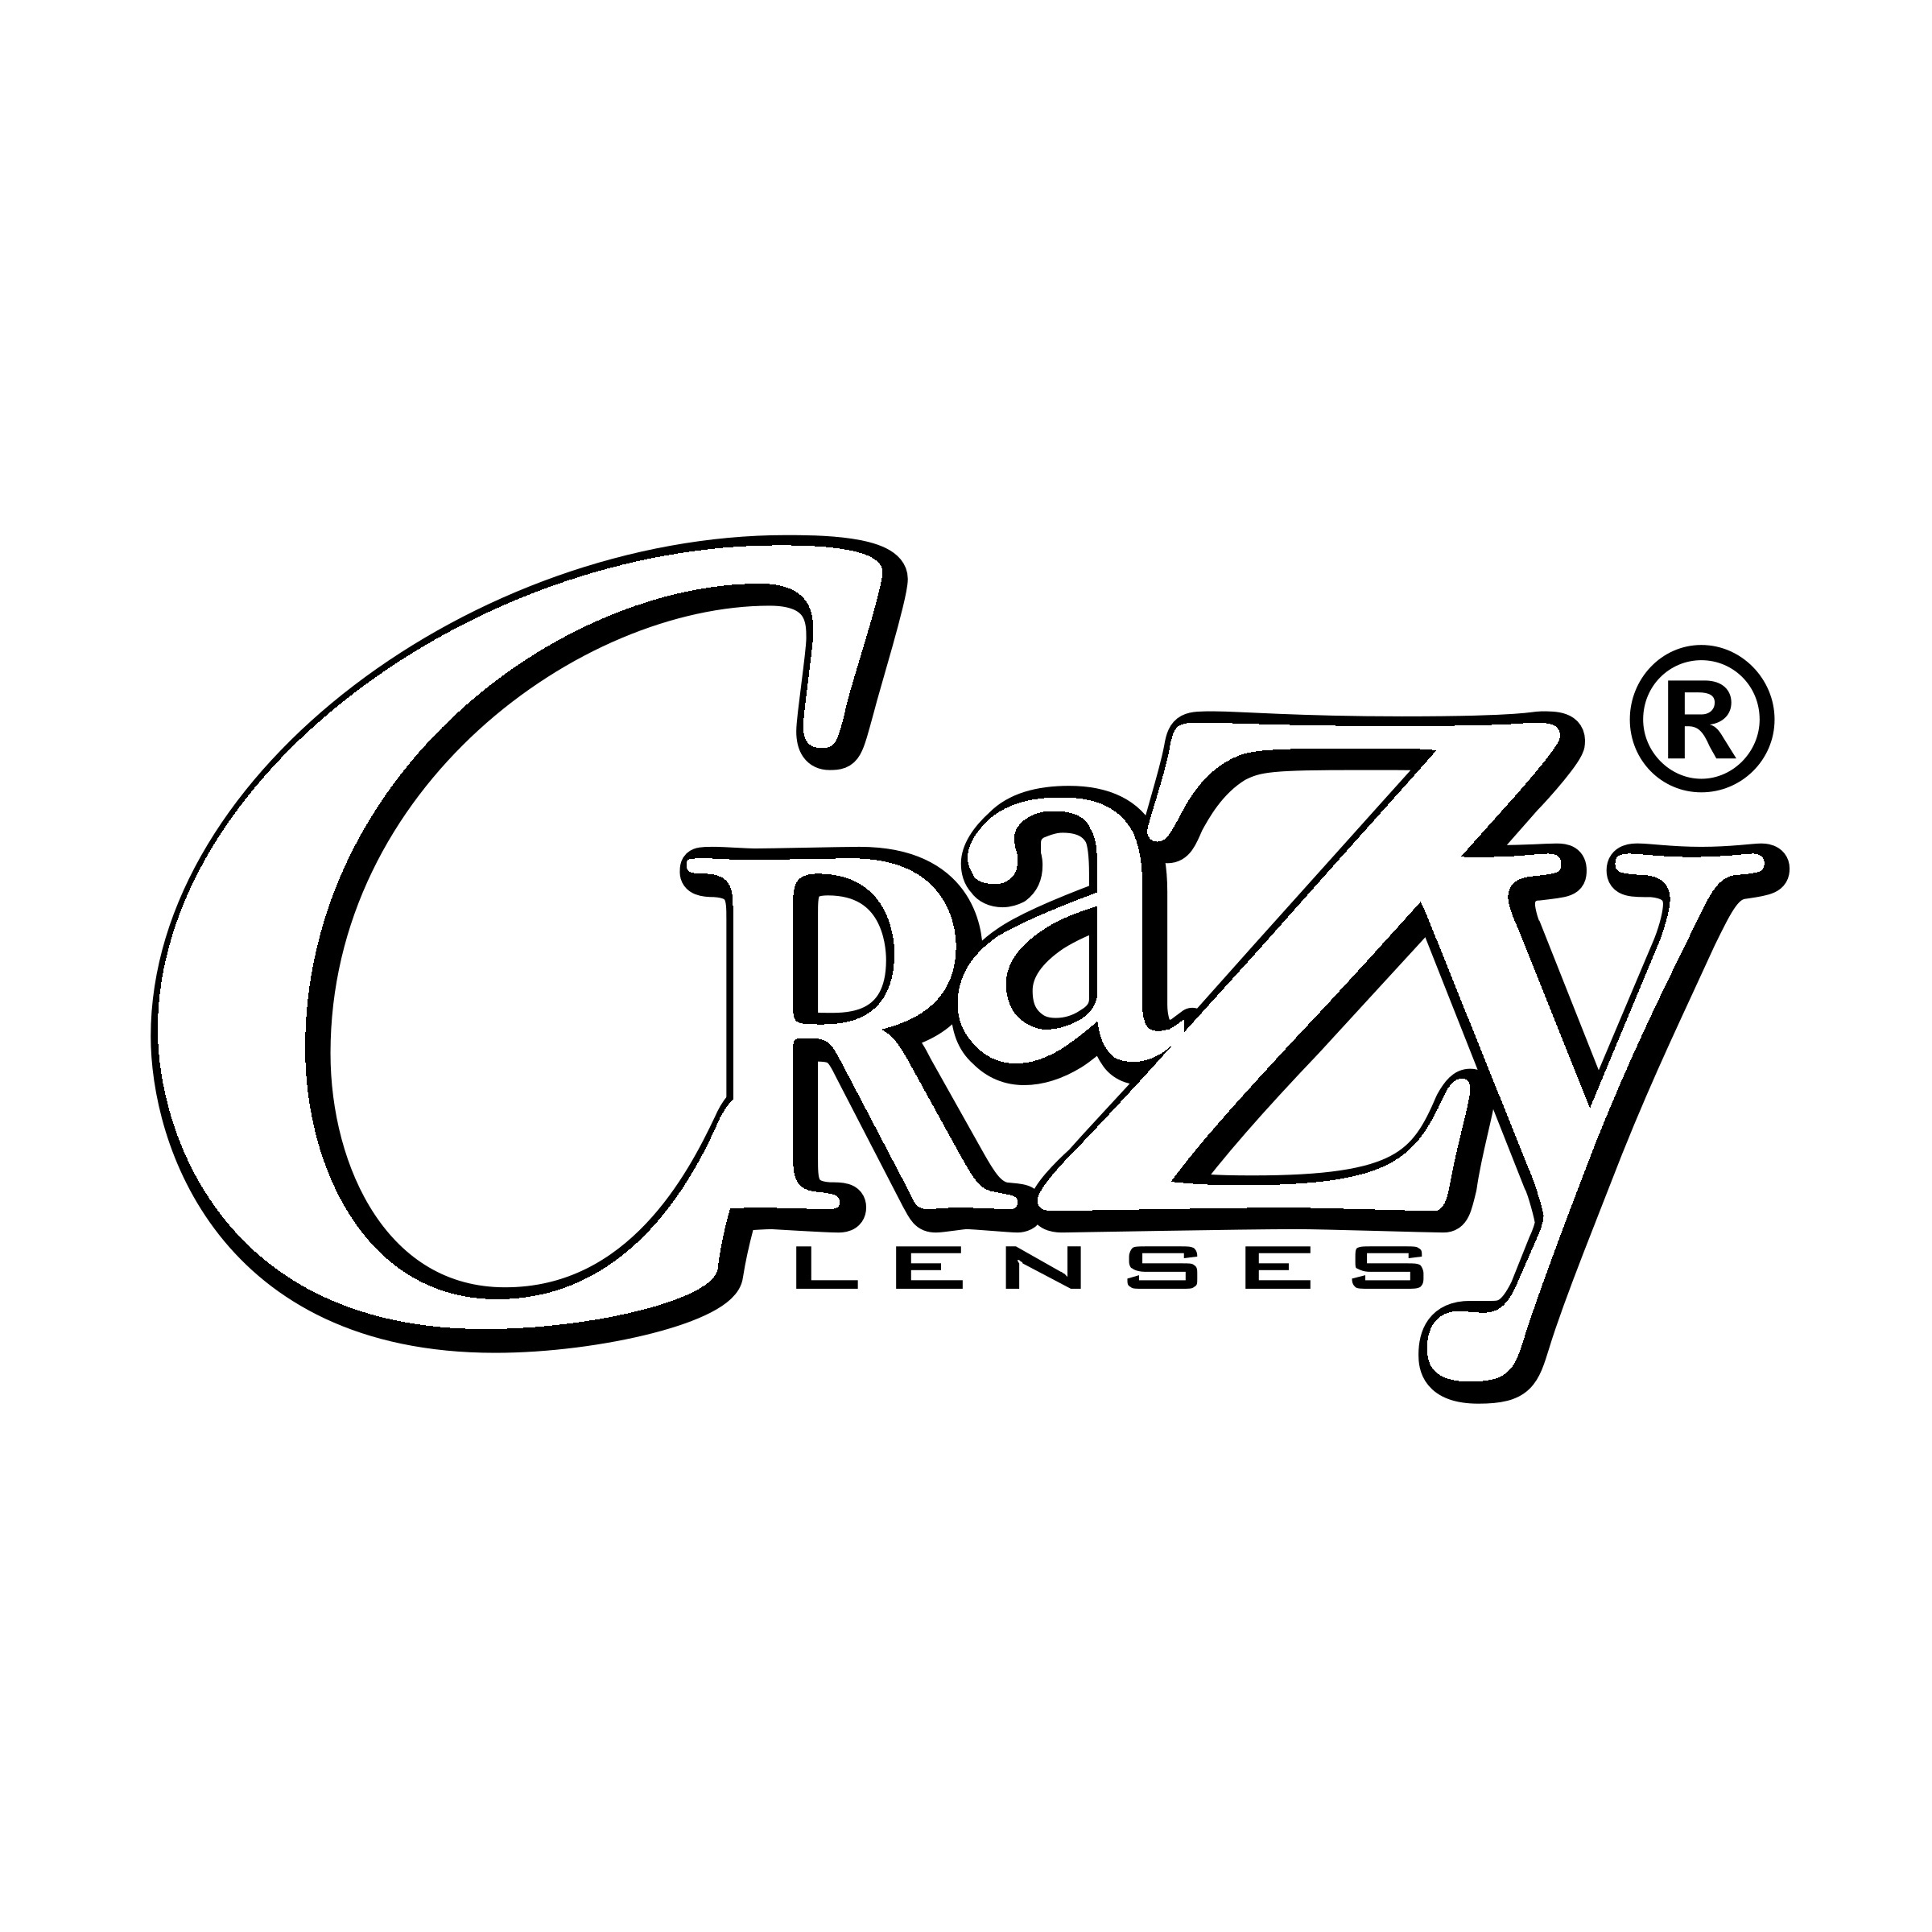 Crazypng Background PNG